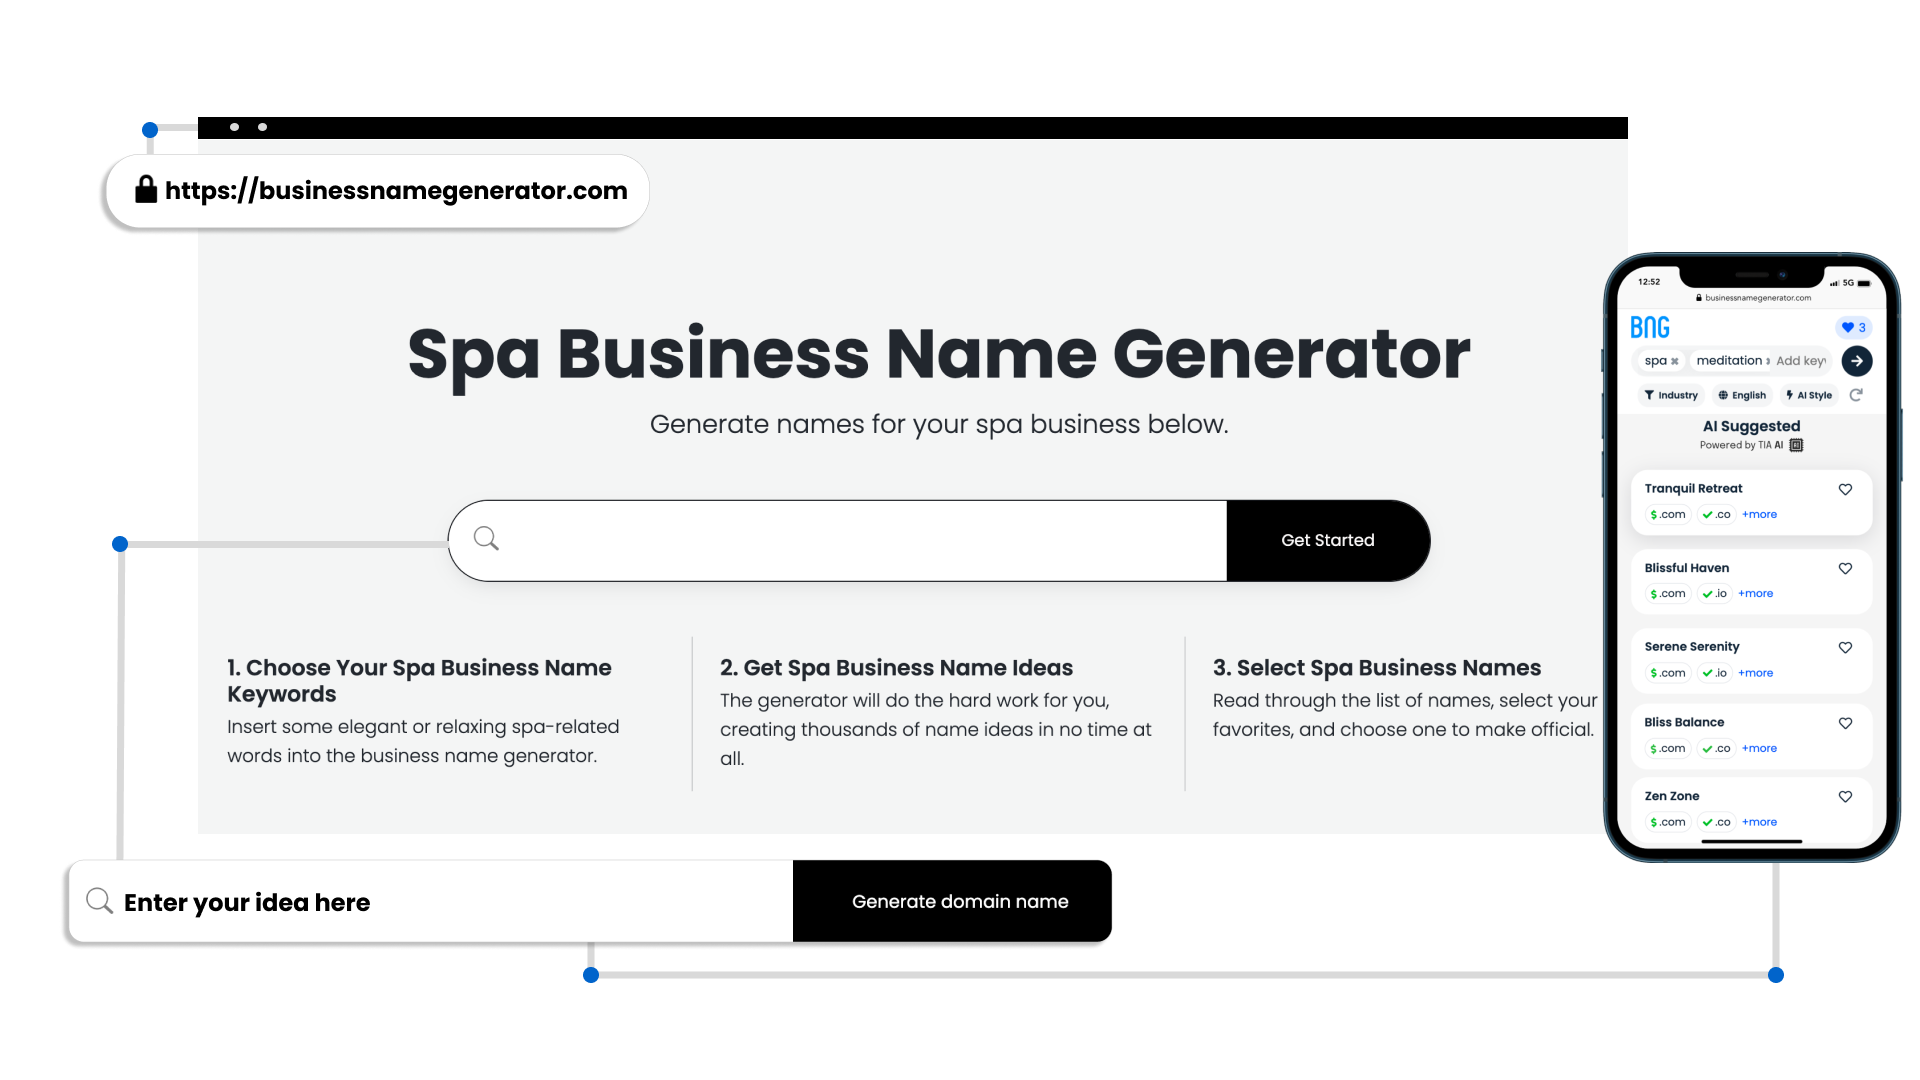 Benefits of Our Spa Name Generator